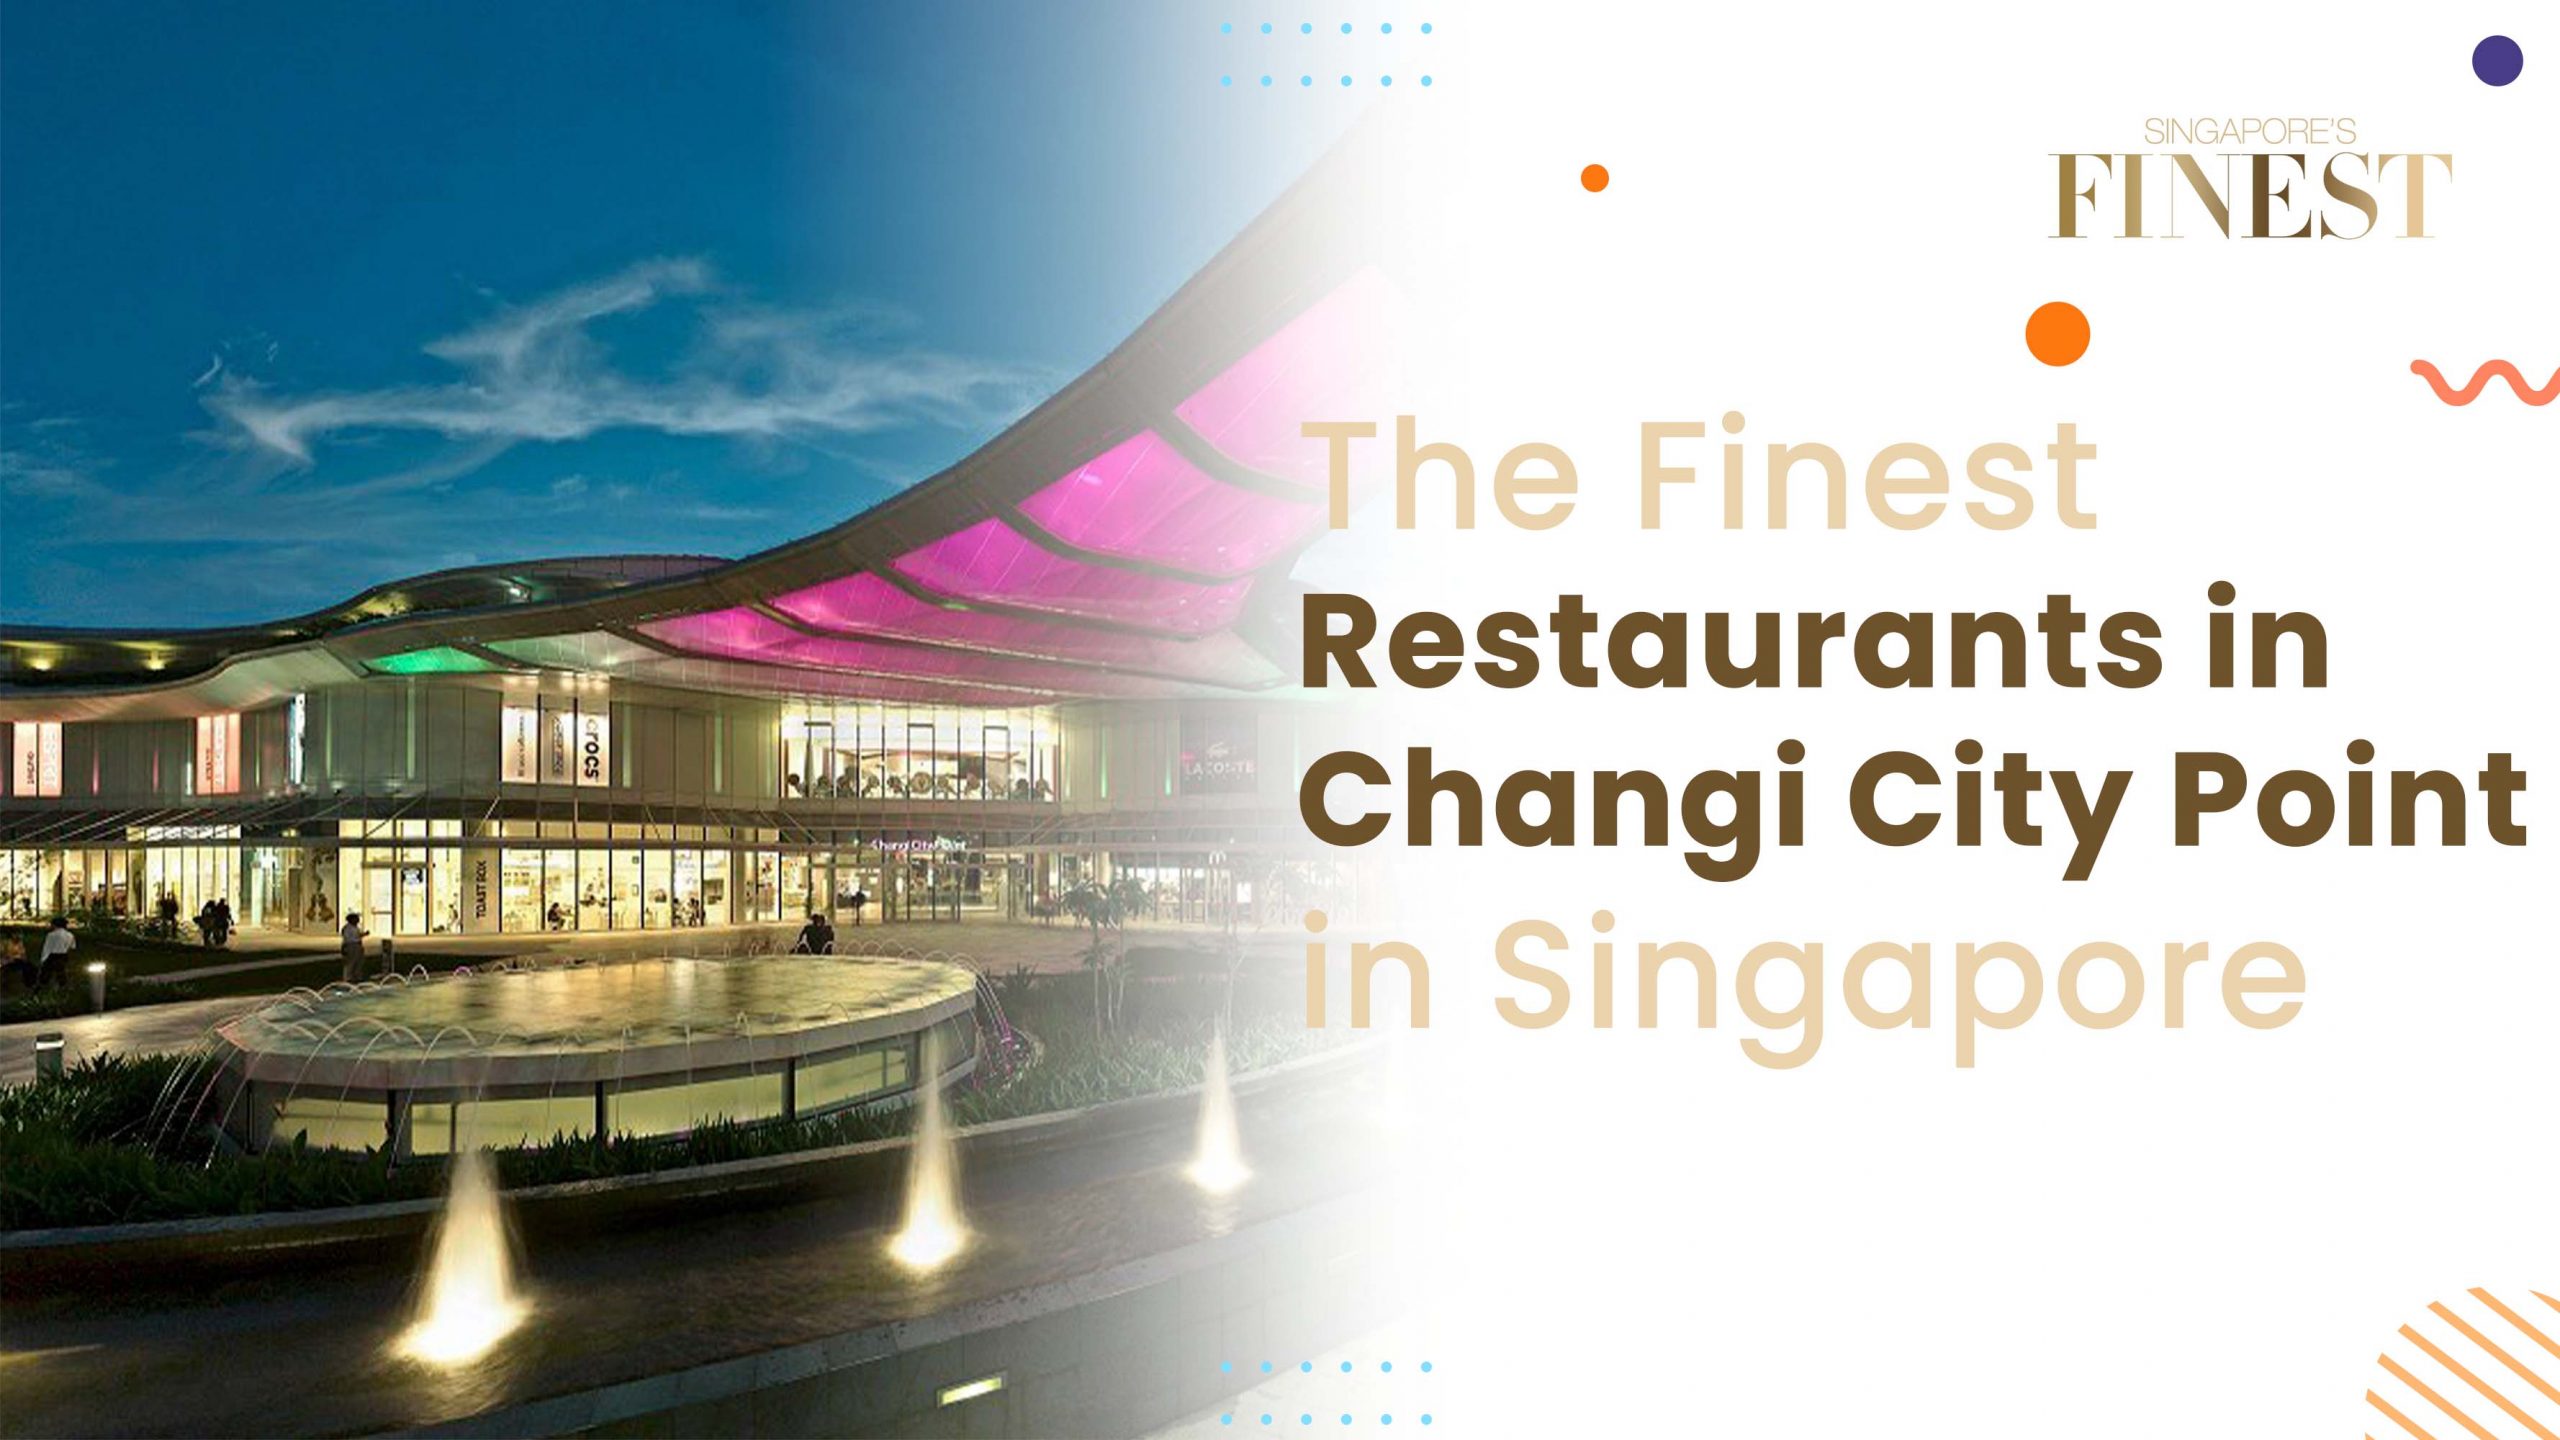 The Finest Restaurants in Changi City Point